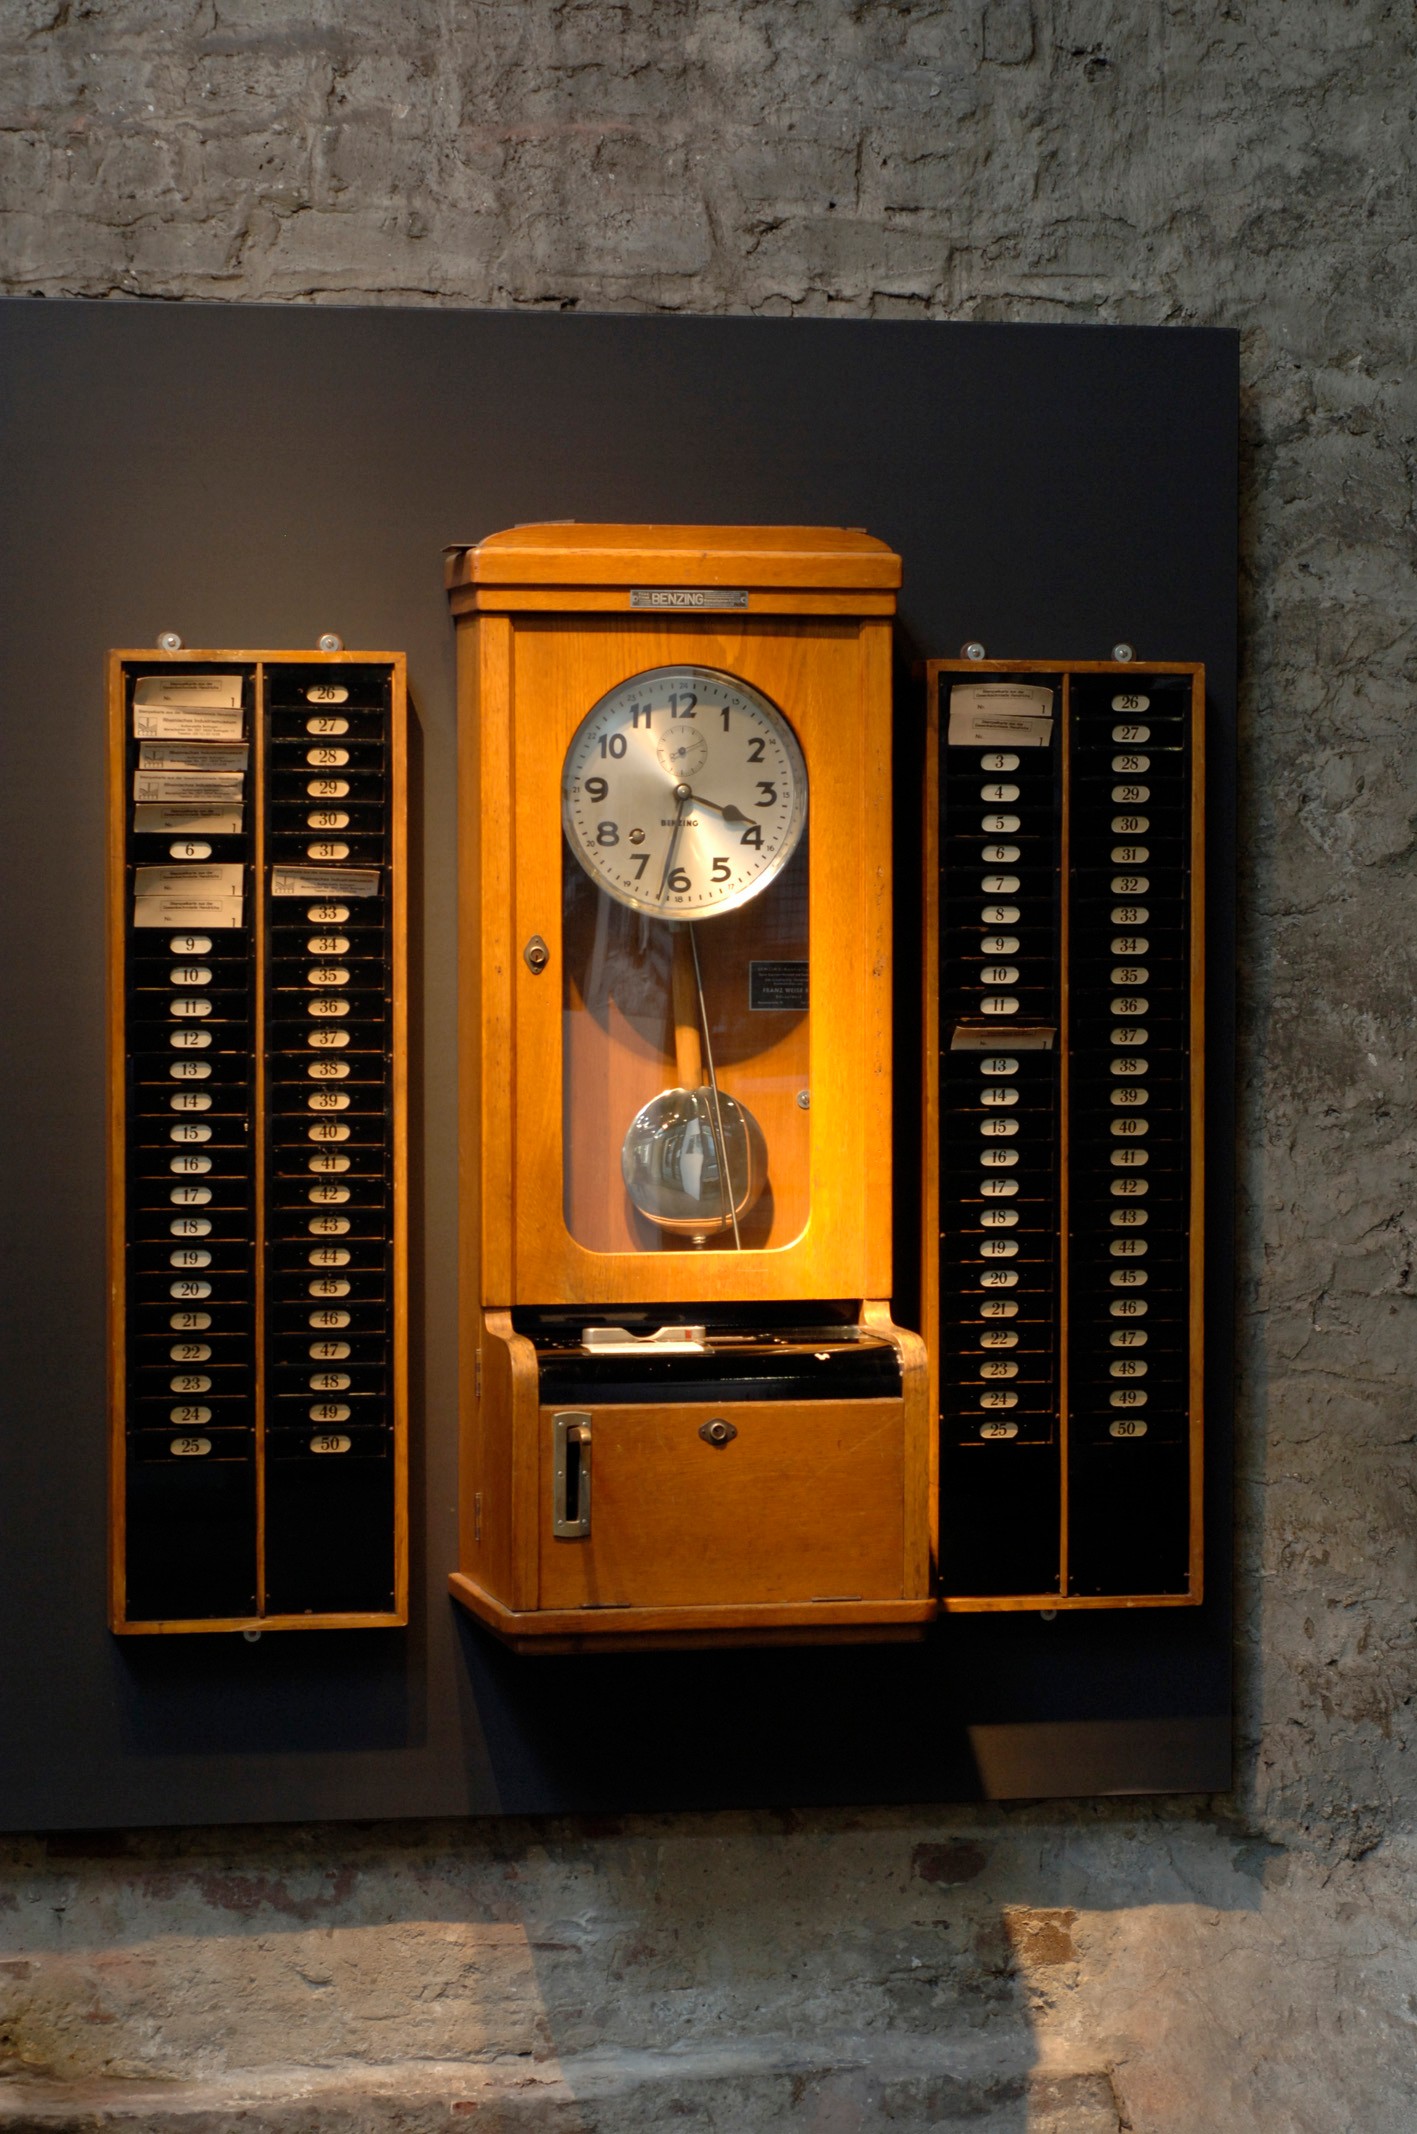 The former time clock at the Gesenkschmiede Hendrichs (Drop Forge) was located at the office.